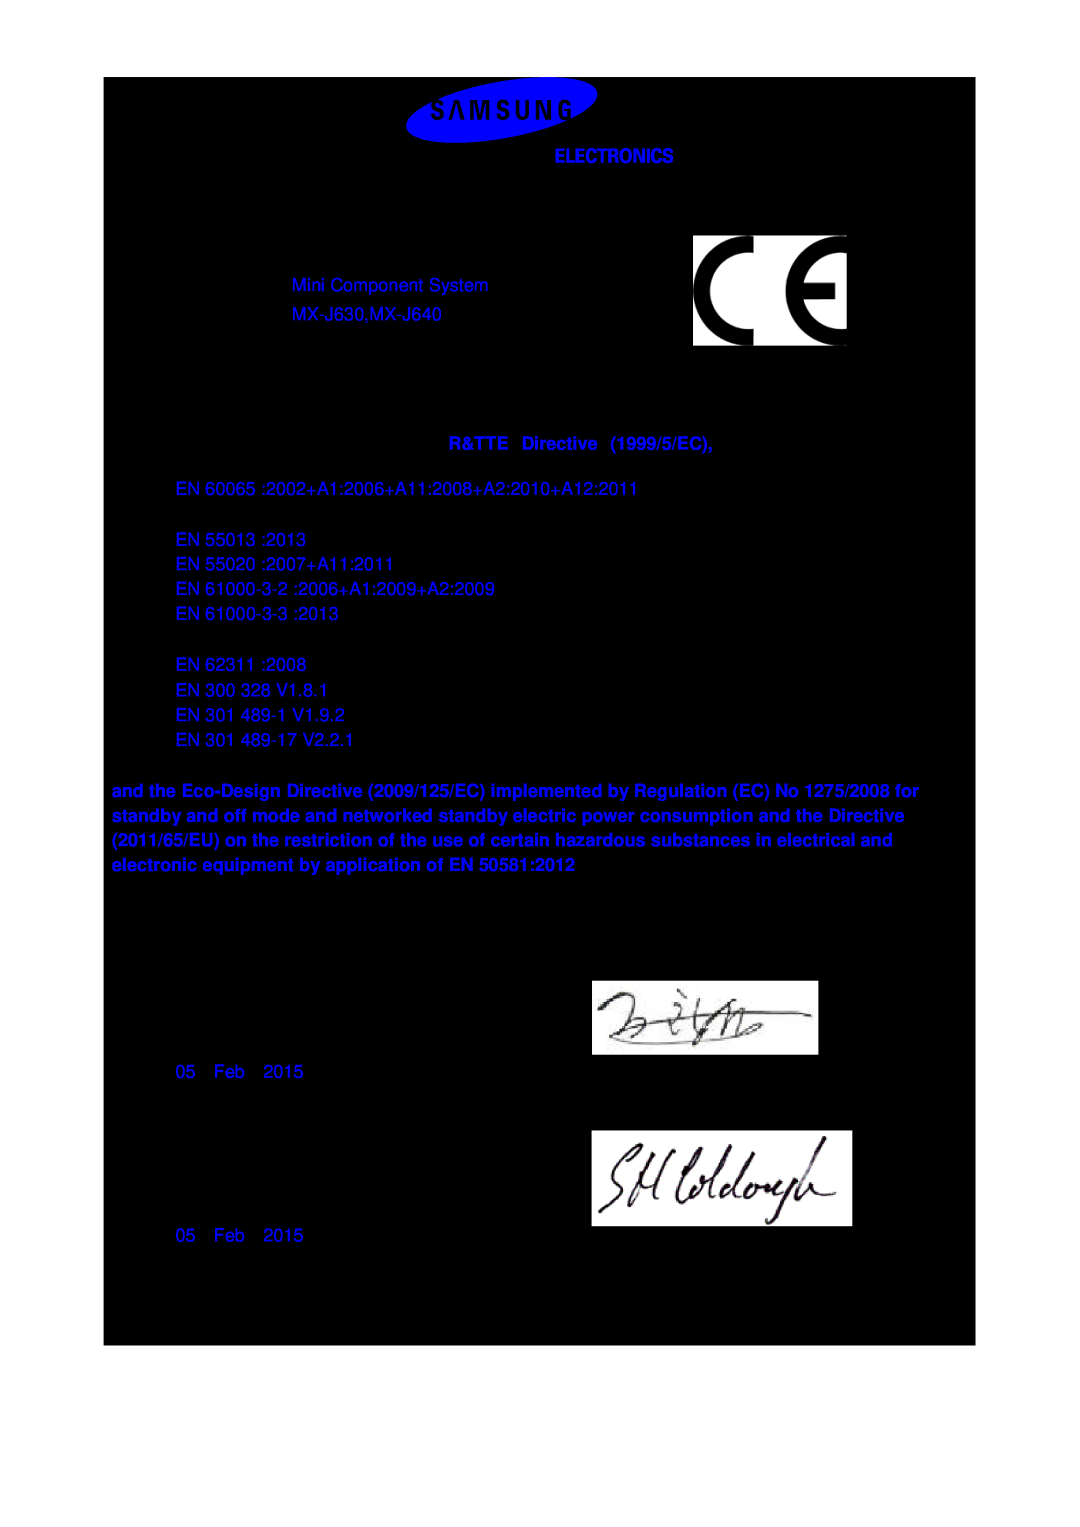 Samsung MX-J730/ZF manual Declaration of Conformity, For the following, Year of Affixing CE Marking, Manufacturer, 05 Feb 